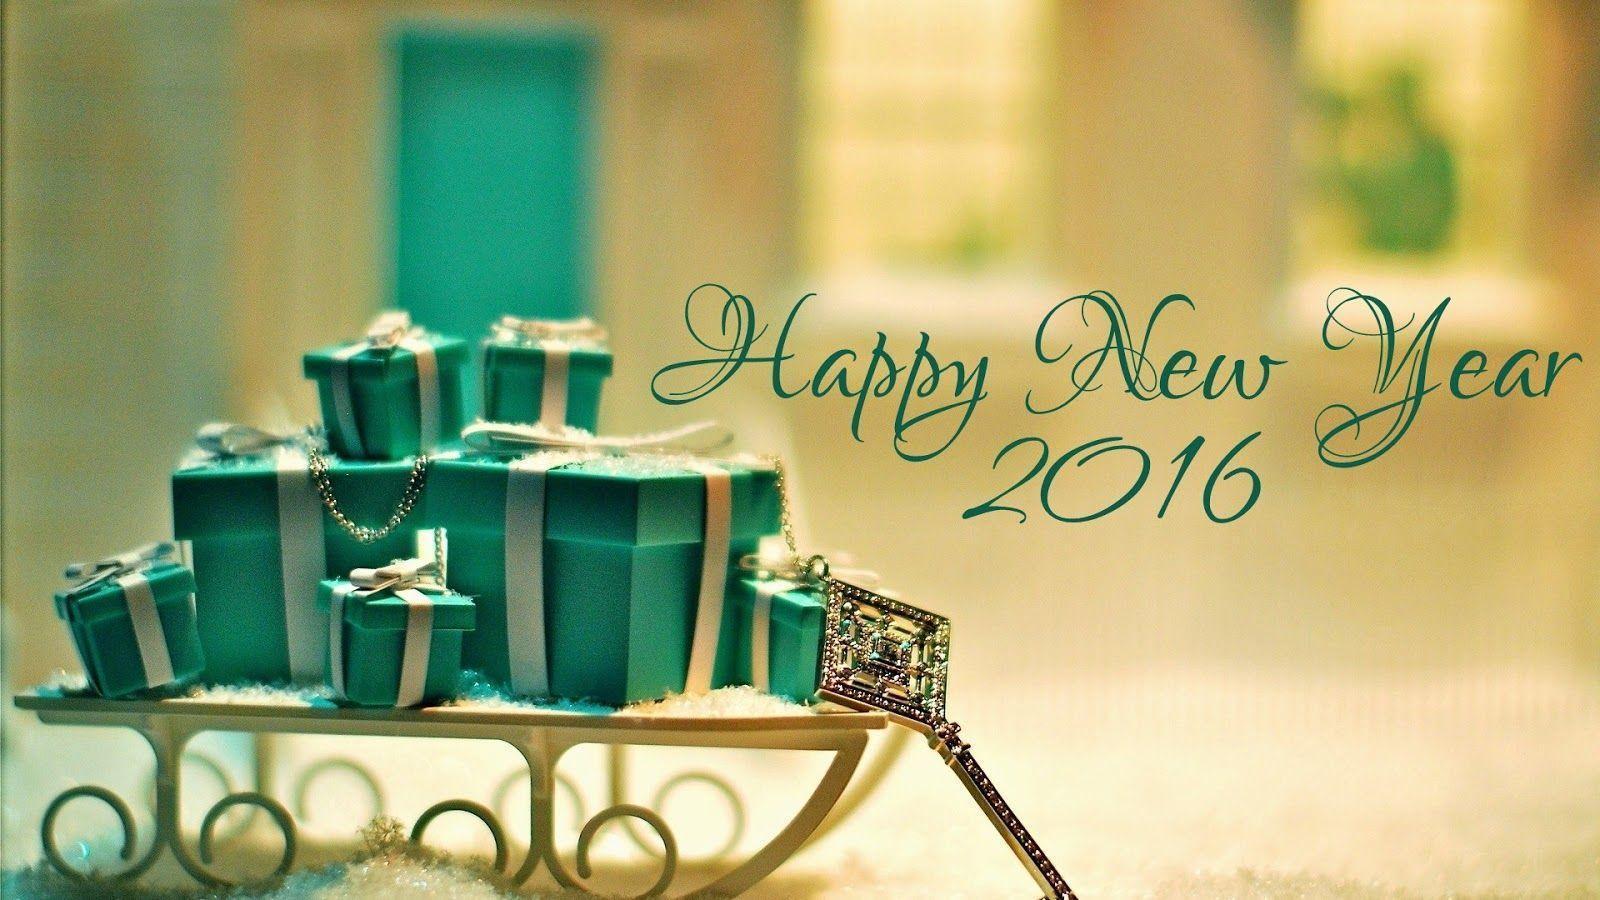 Happy New Year 2017 Wallpaper in HD New Years 2017 Image